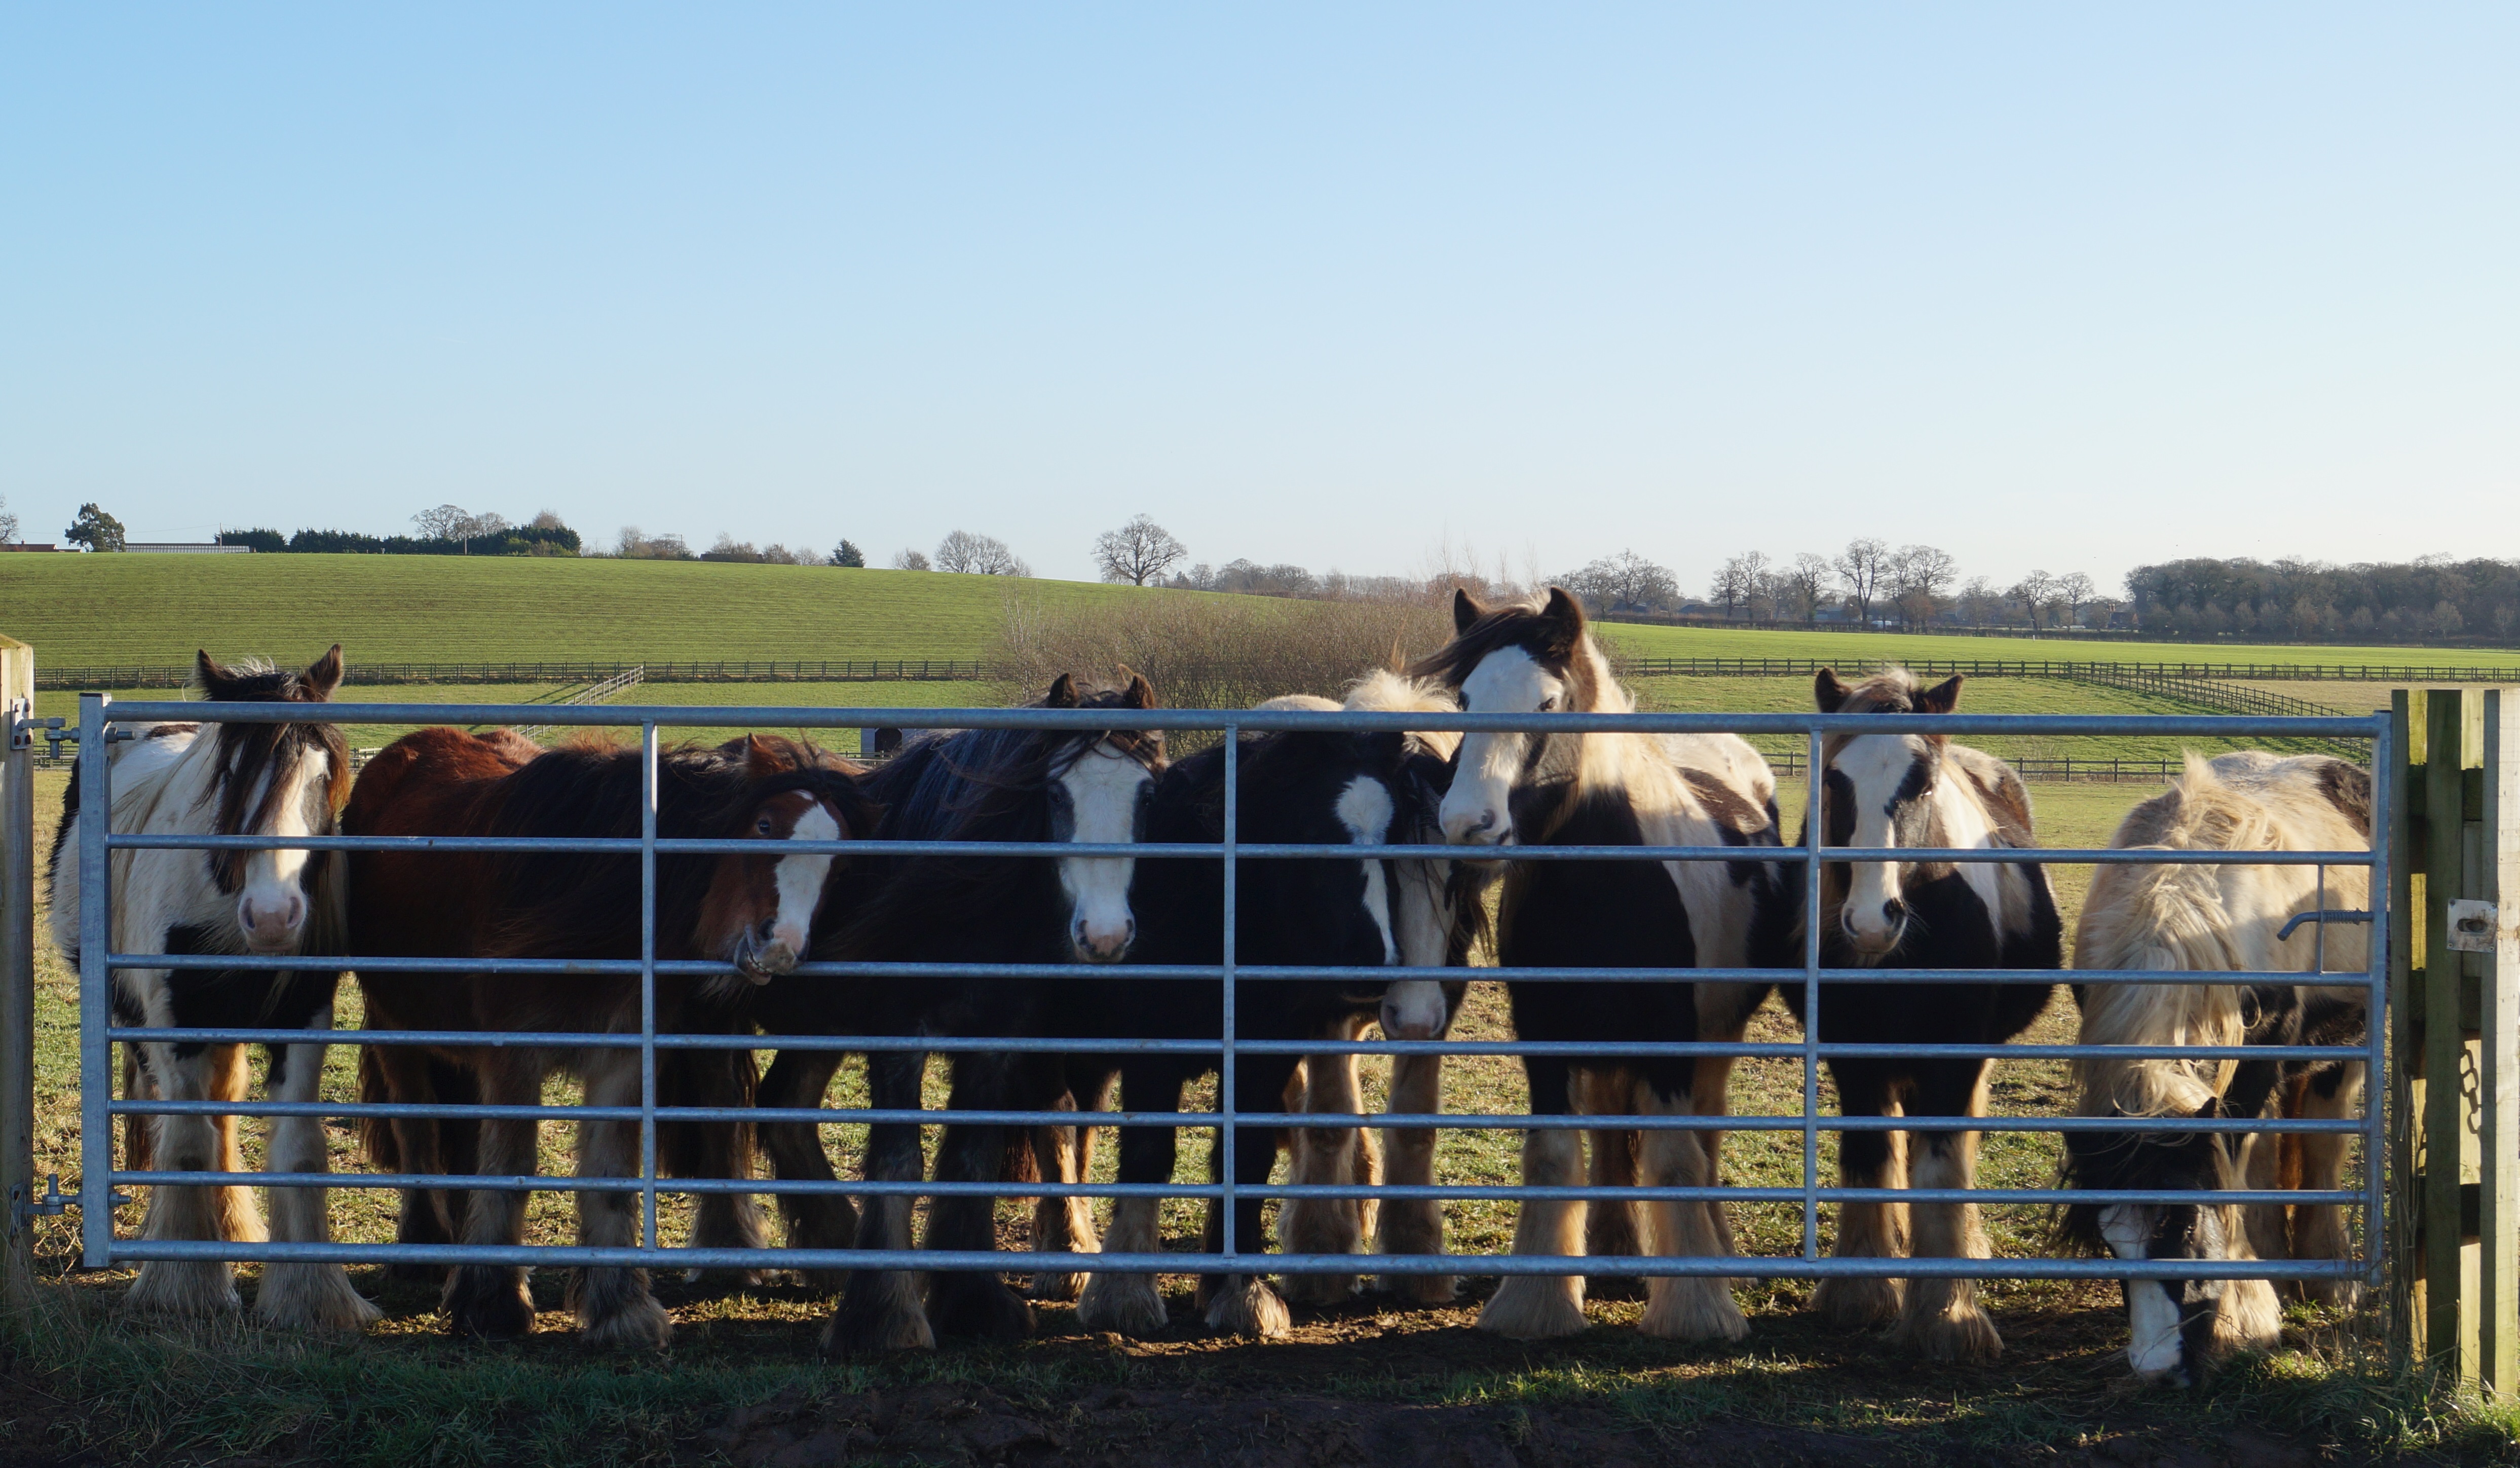 Ponies lined up at the fence